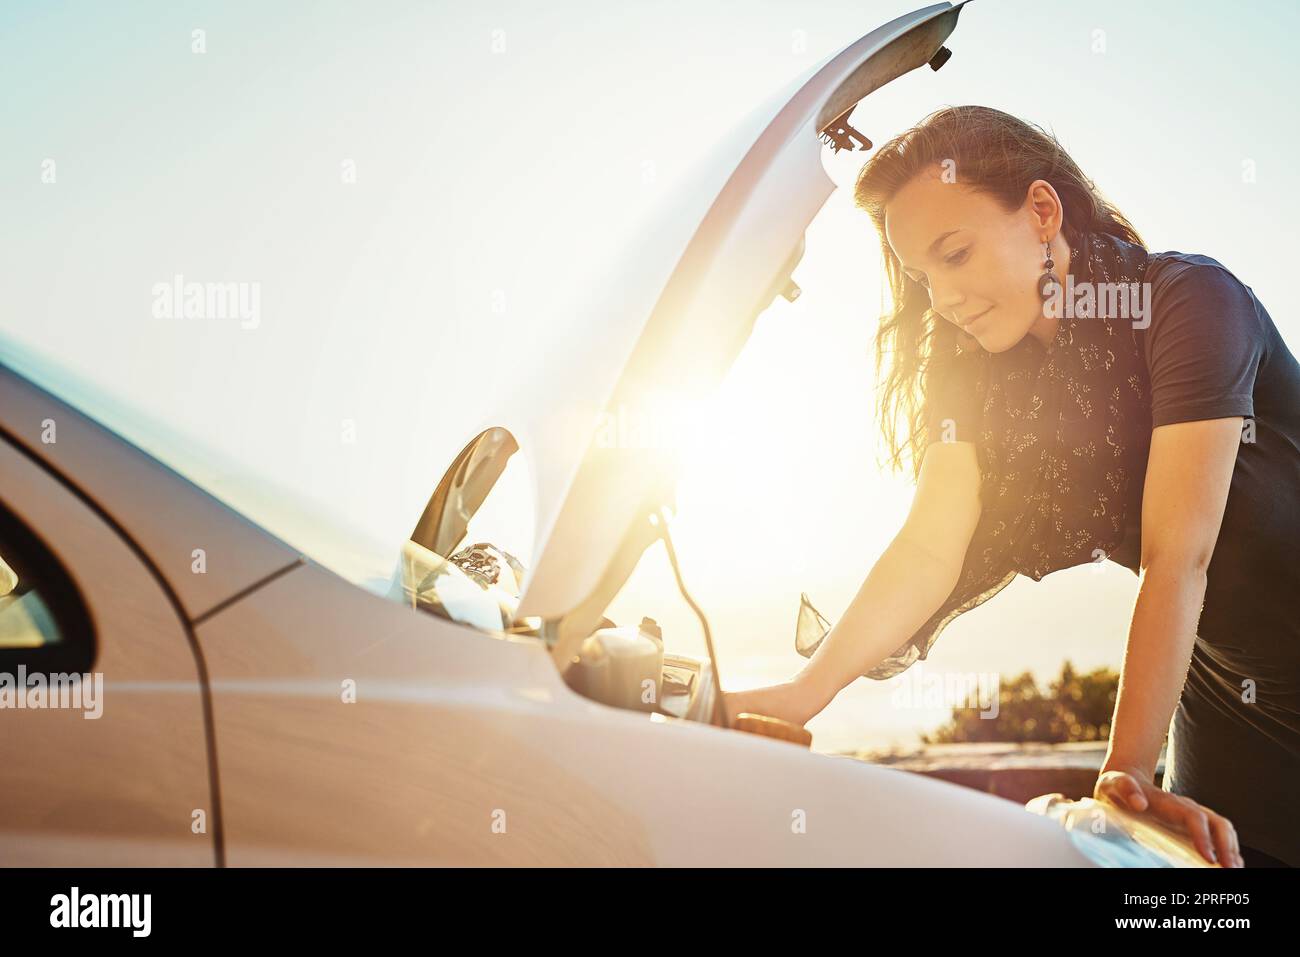 Shes got some mechanical difficulties with her car. a young woman checking under the hood of her car after breaking down on the roadside. Stock Photo